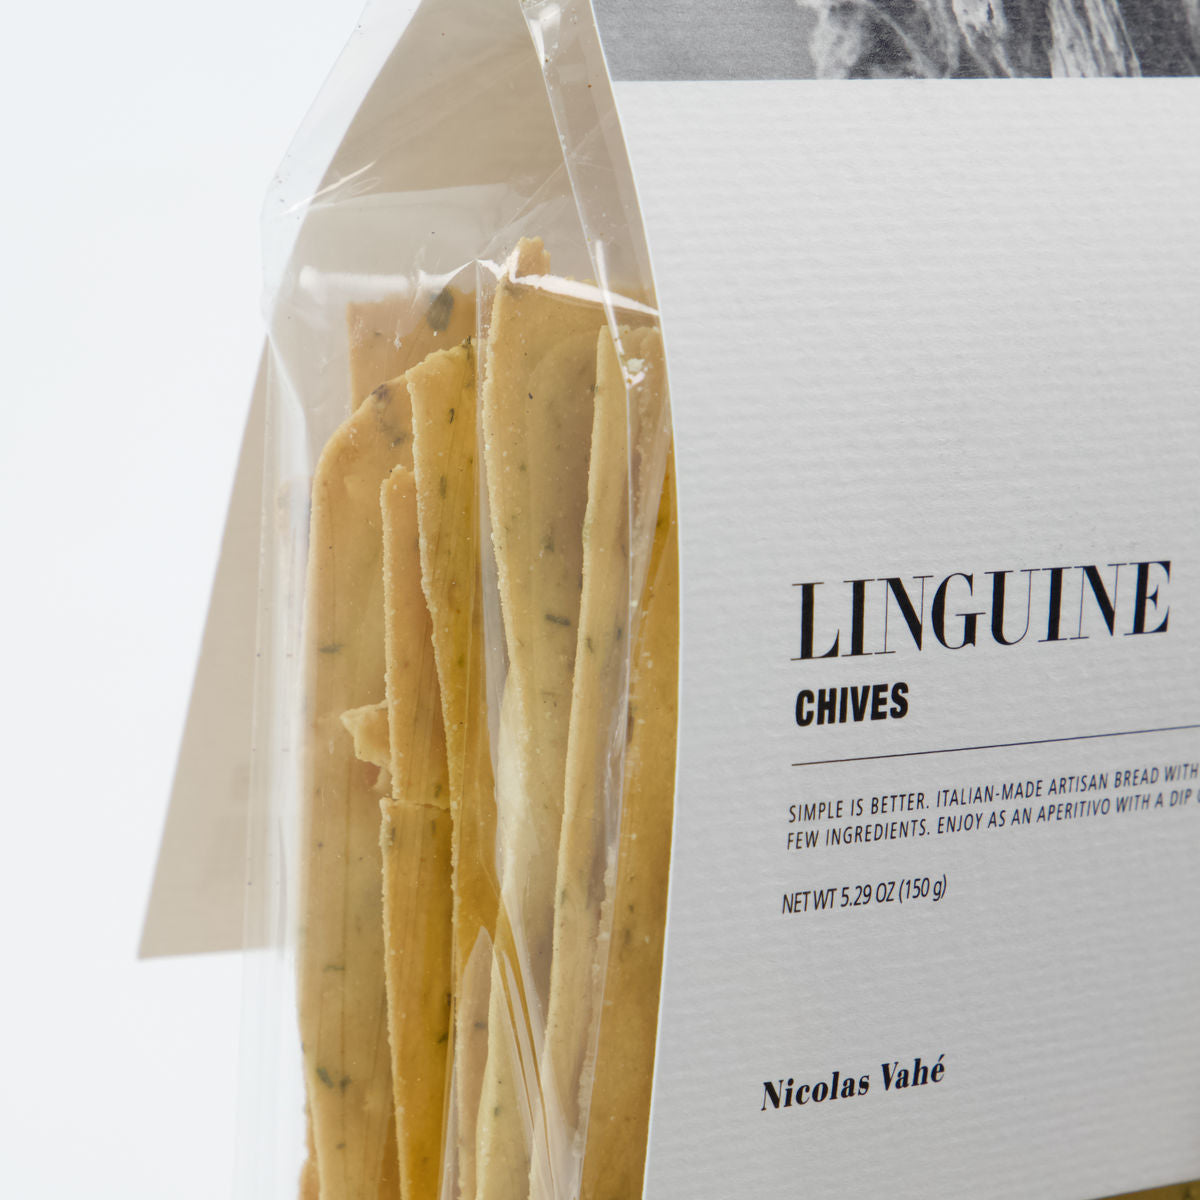 Linguine, Chives crackers